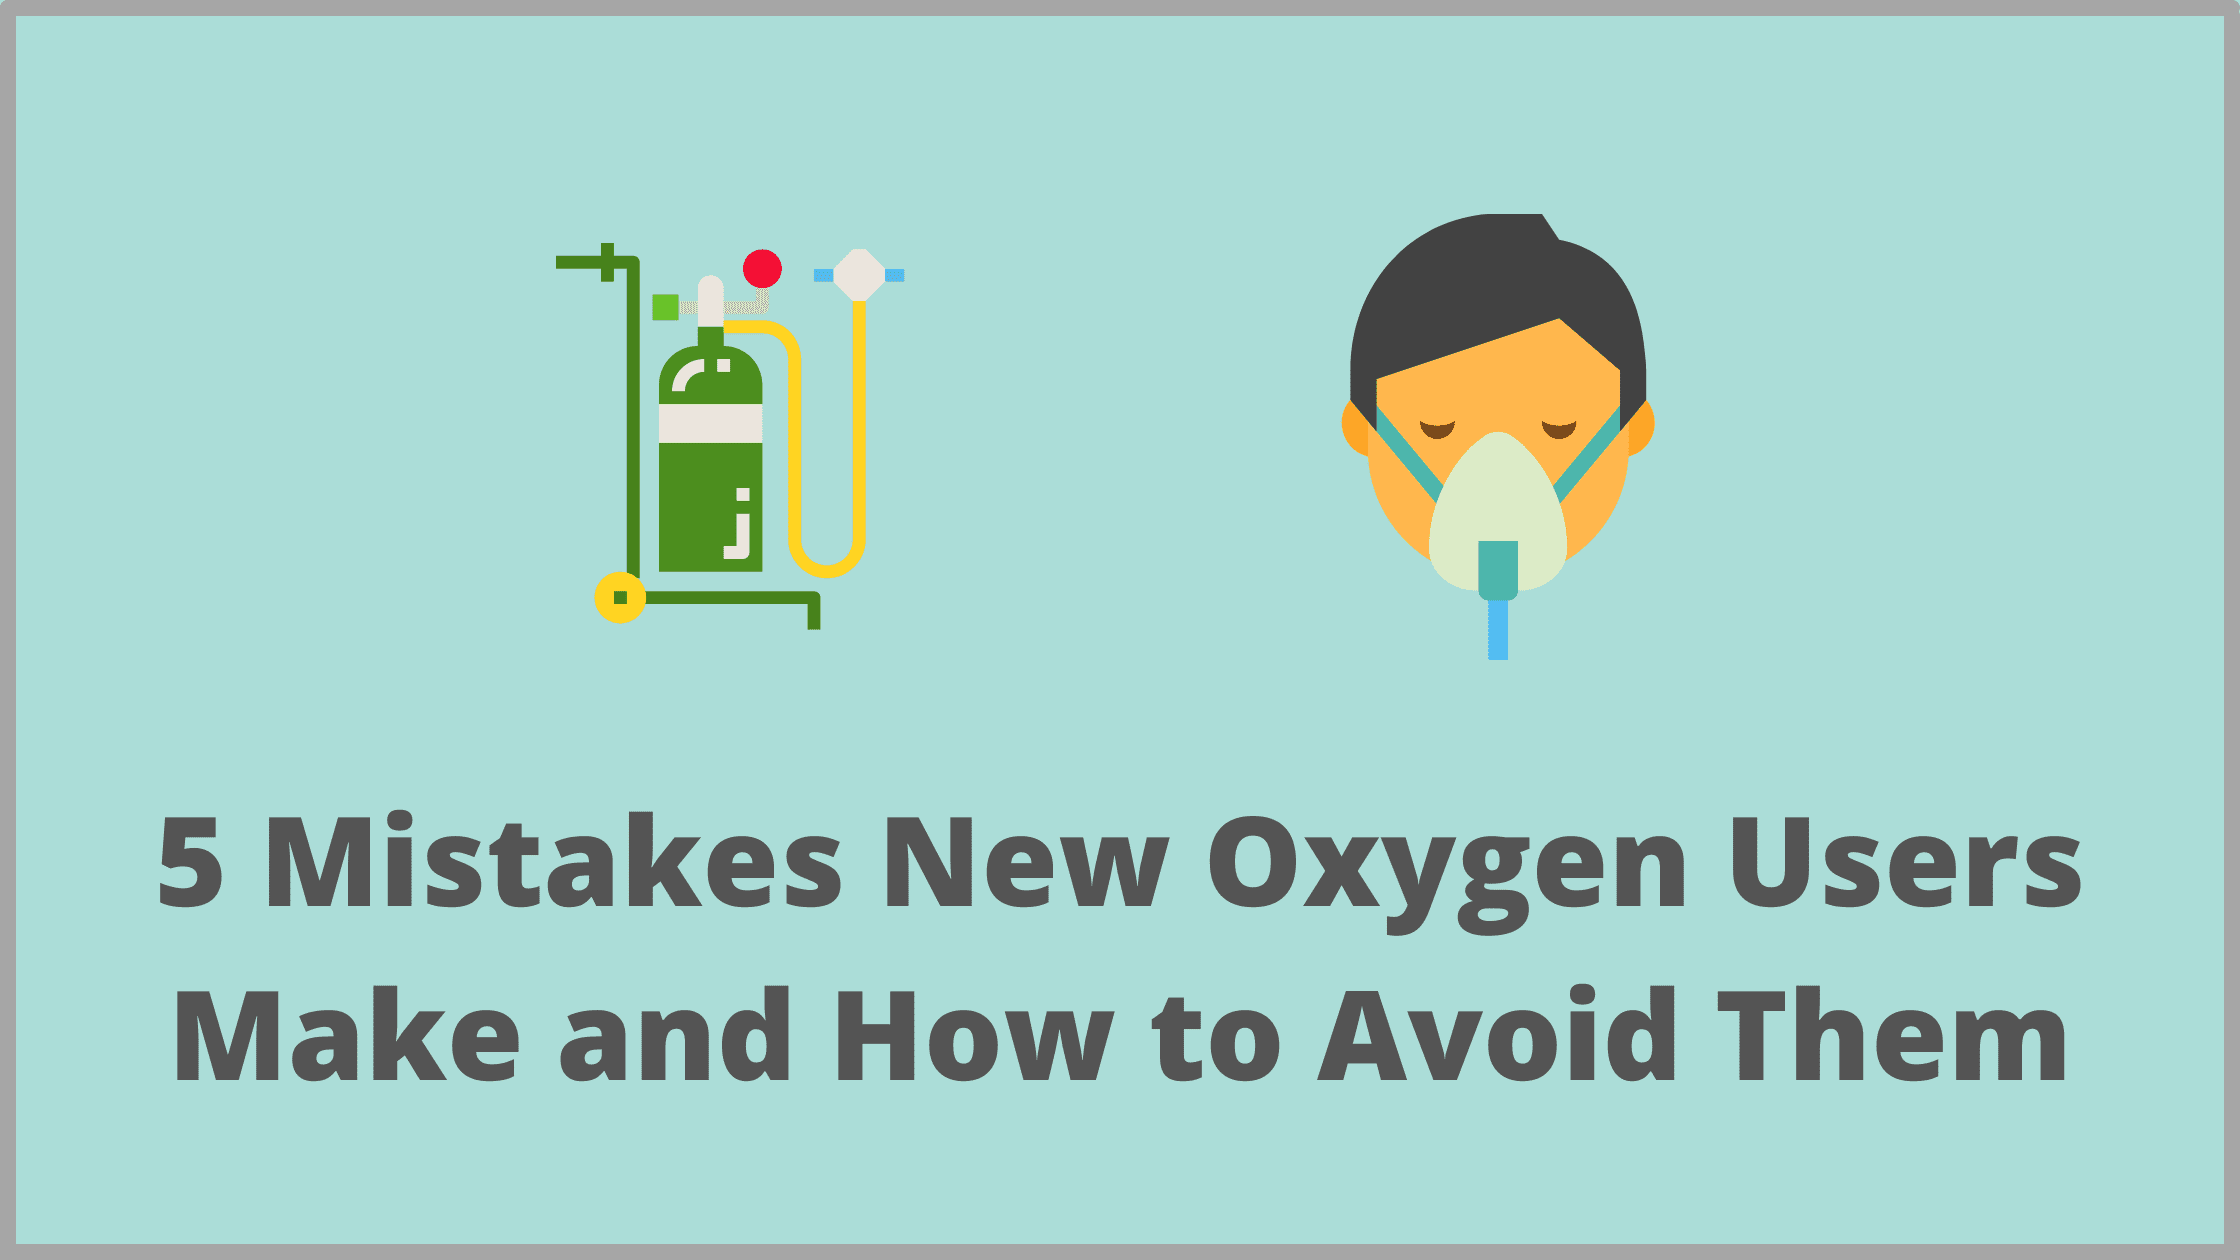 5 Mistakes New Oxygen Users Make and How to Avoid Them